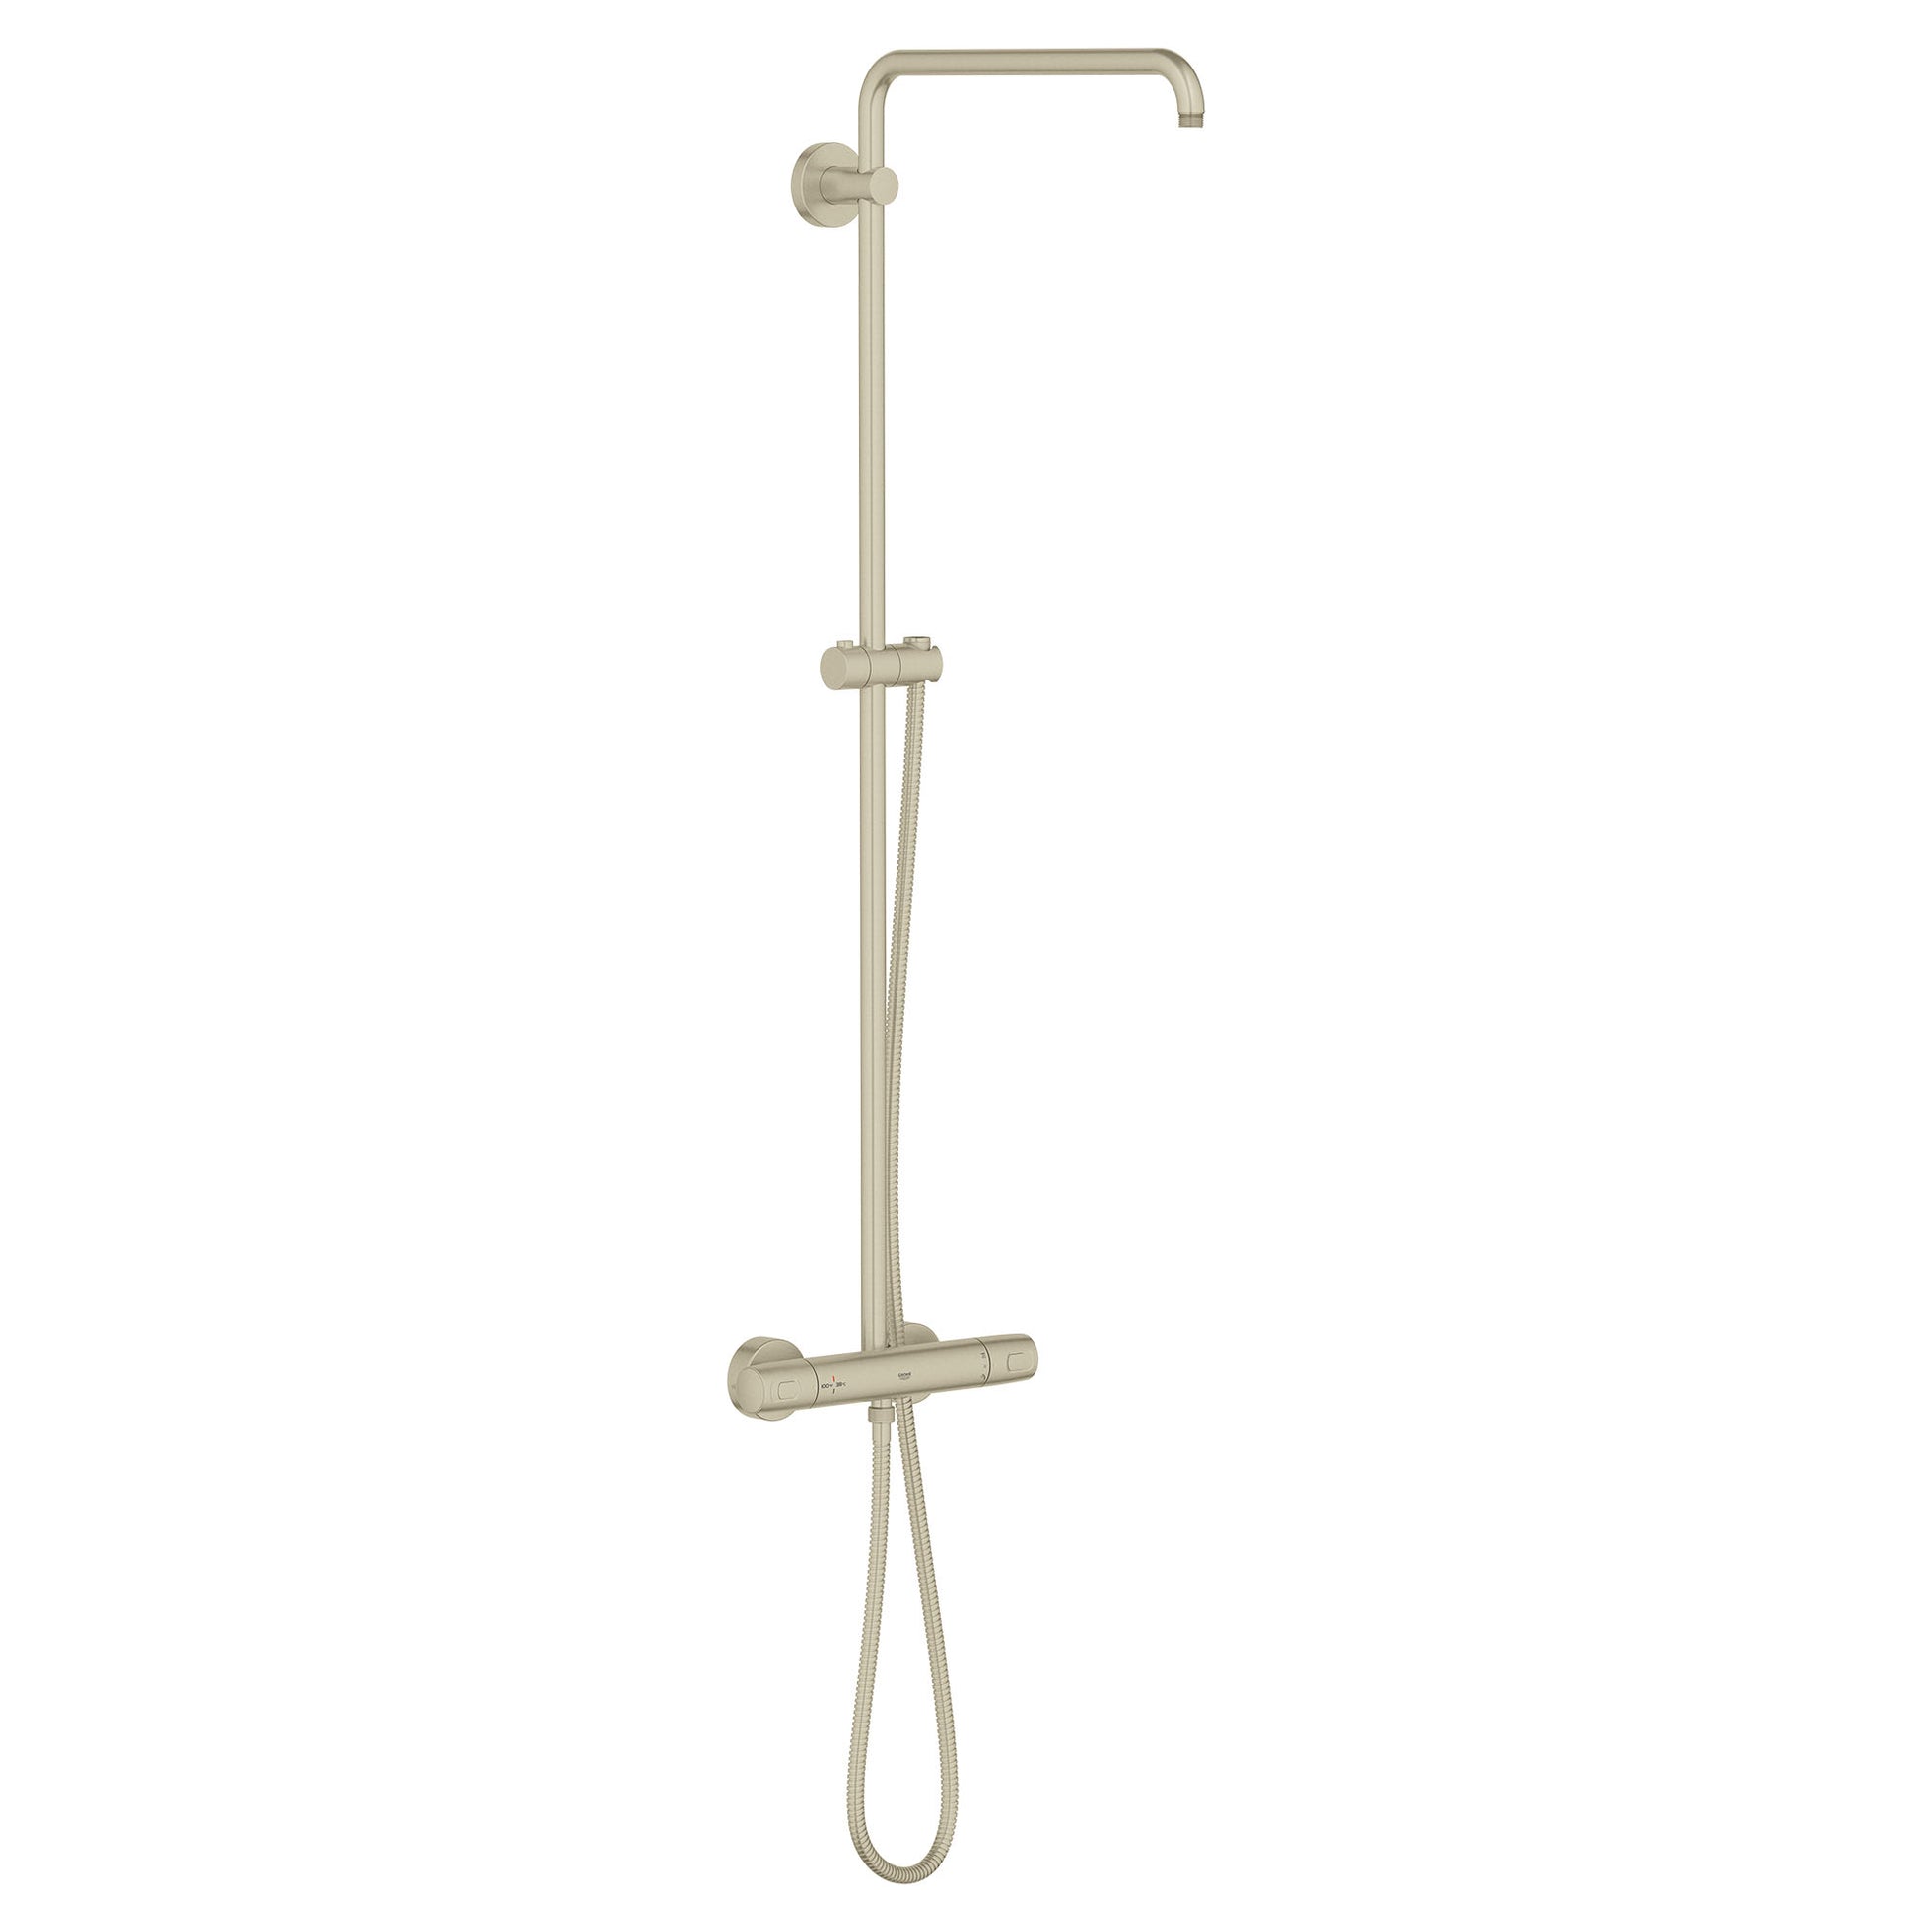 GROHE 26728EN0 Euphoria Brushed Nickel CoolTouchThermostatic Shower System